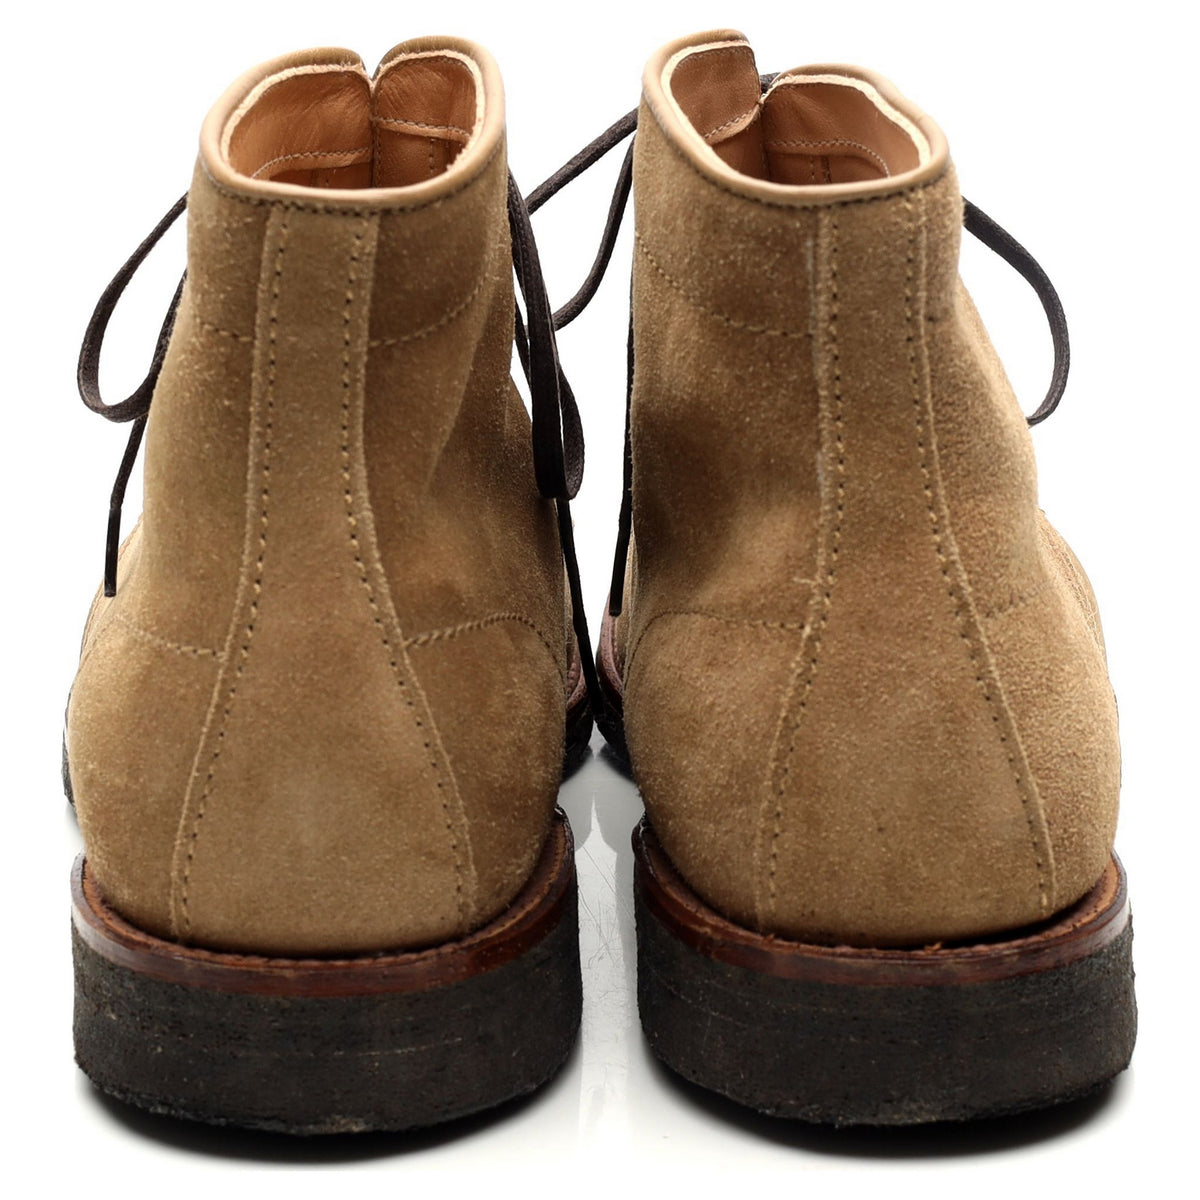 &#39;46050H &#39; Sand Brown Suede Boots UK 10.5 US 11